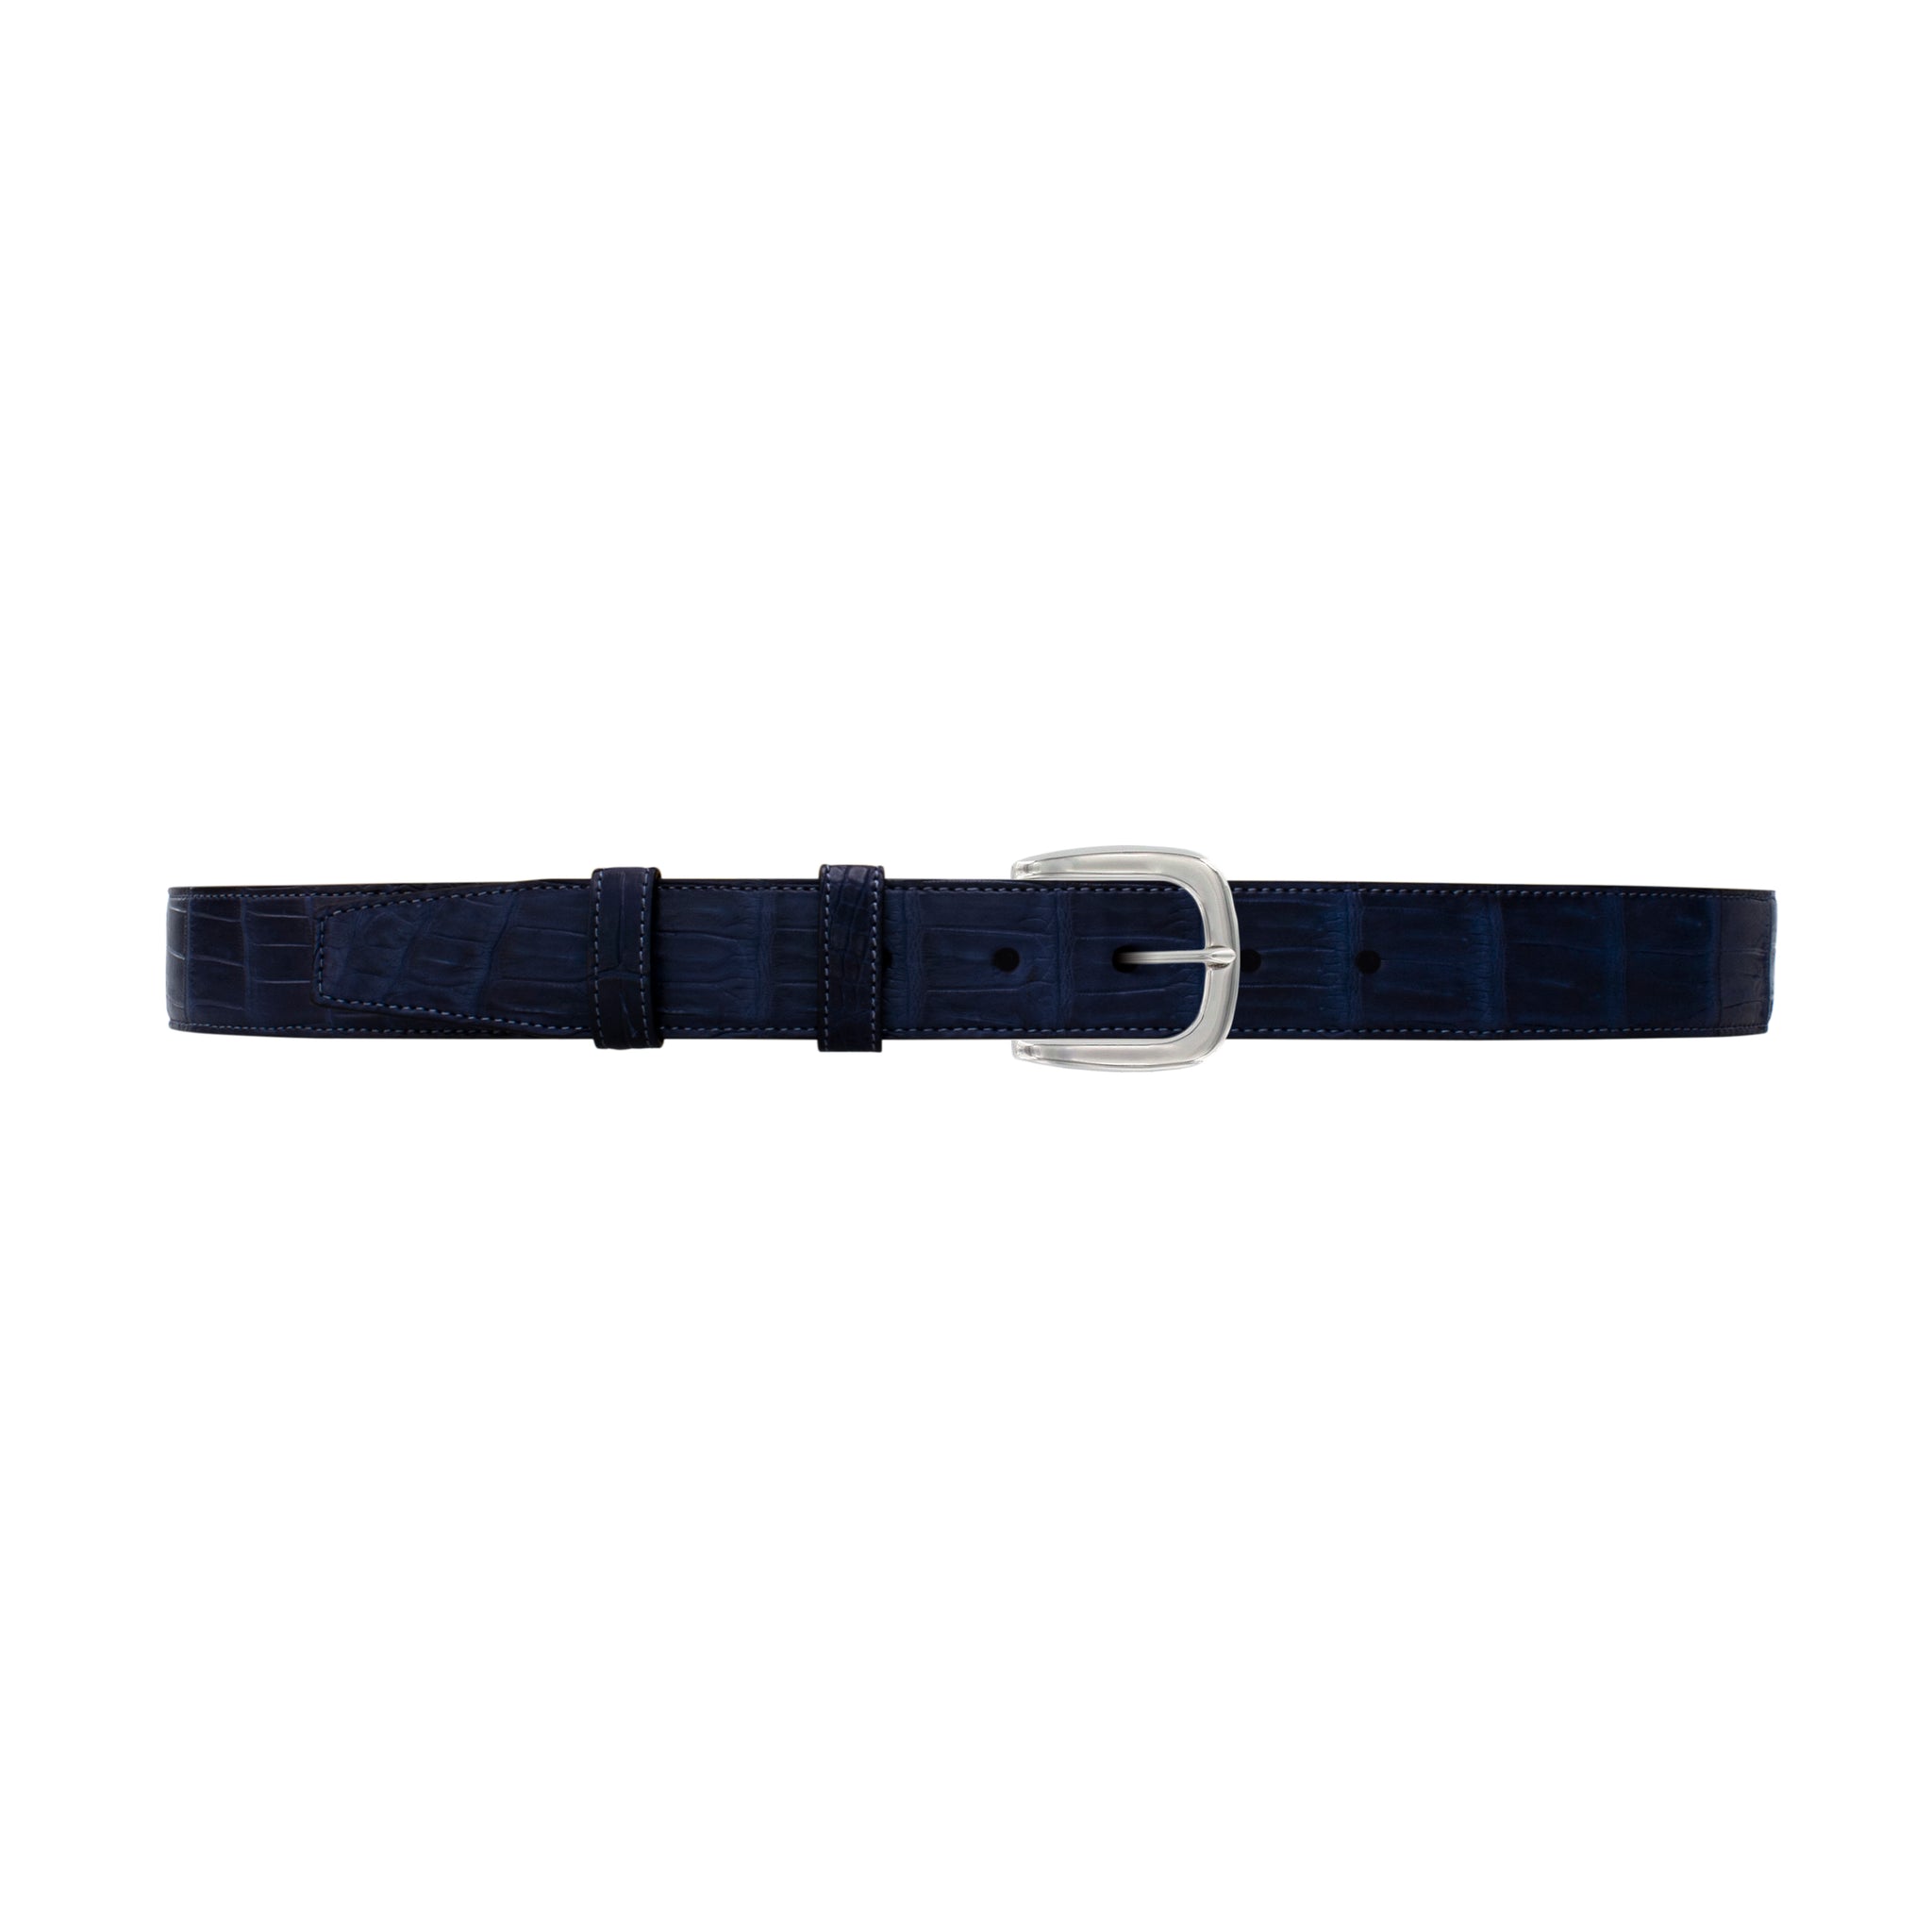 1 1/4" Midnight Classic Belt with Oxford Cocktail Buckle in Polished Nickel